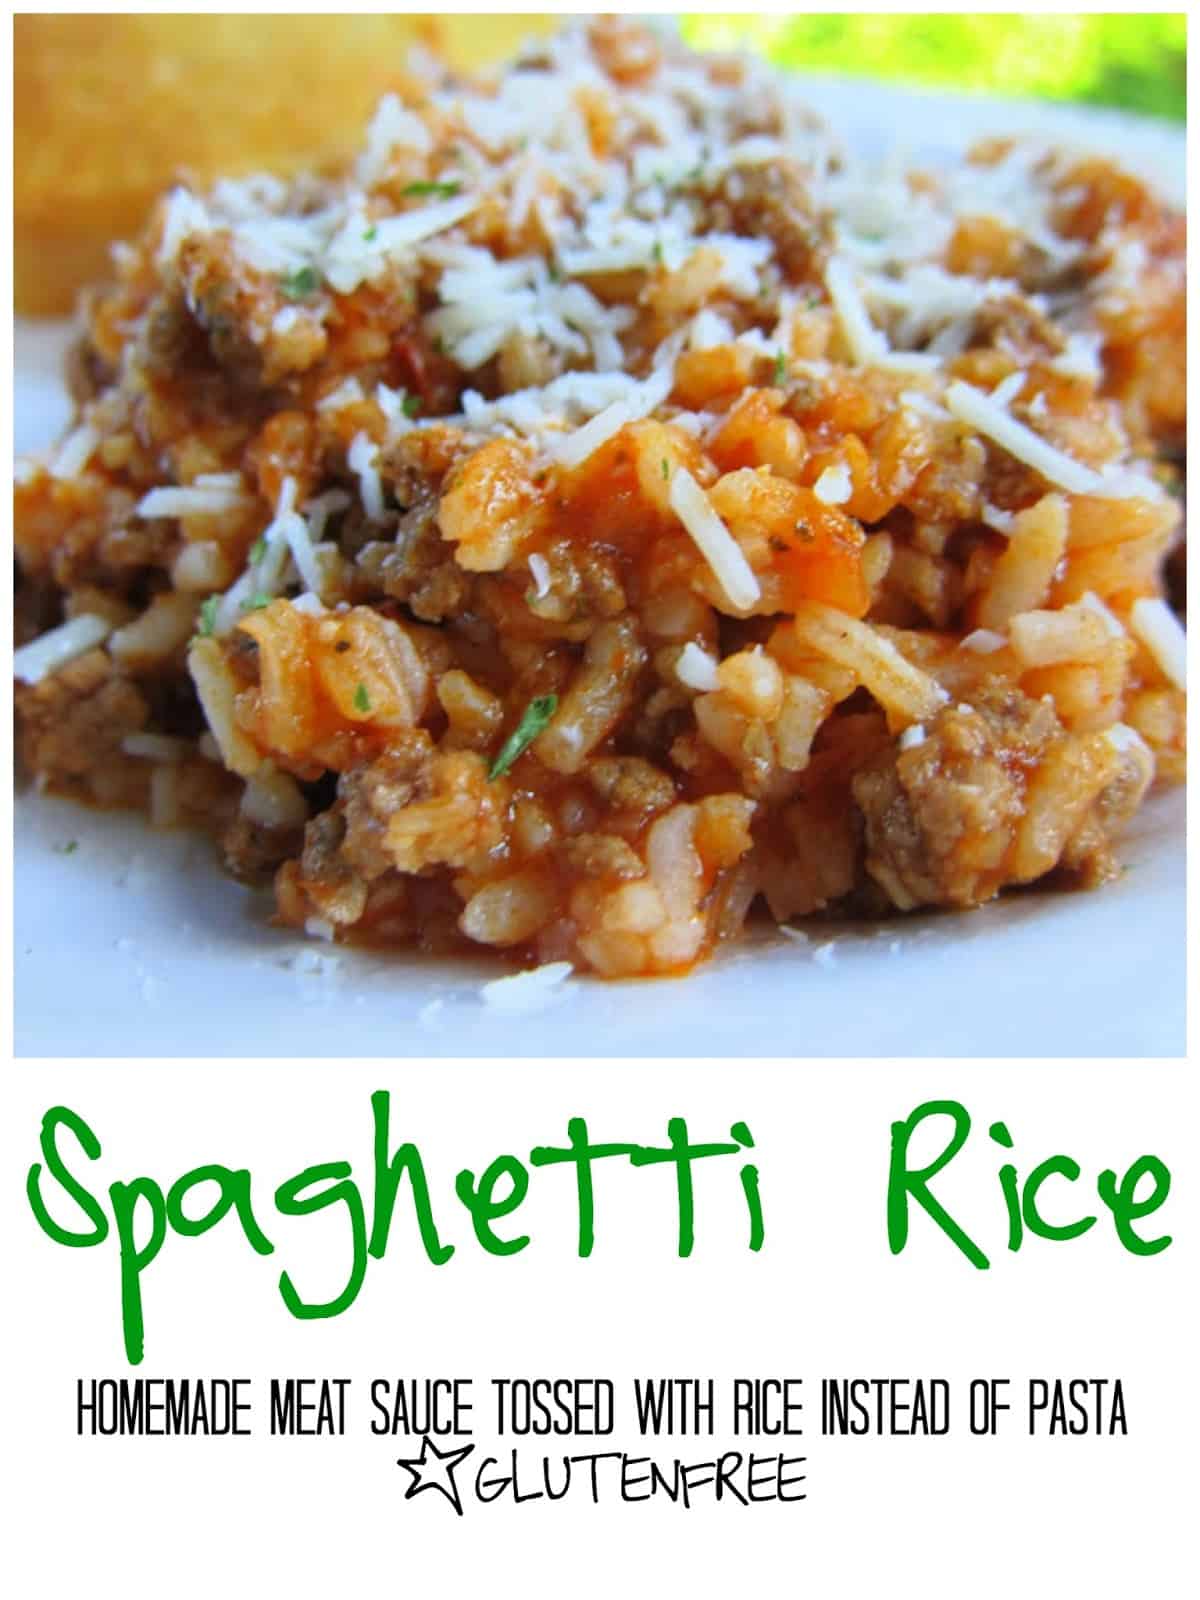 Spaghetti Rice Recipe - homemade meat sauce tossed with rice instead of pasta. Italian sausage or hamburger, tomato sauce, garlic, onions, Italian spices and rice. Ready in about 15 minutes and naturally gluten free! We LOVED this!!